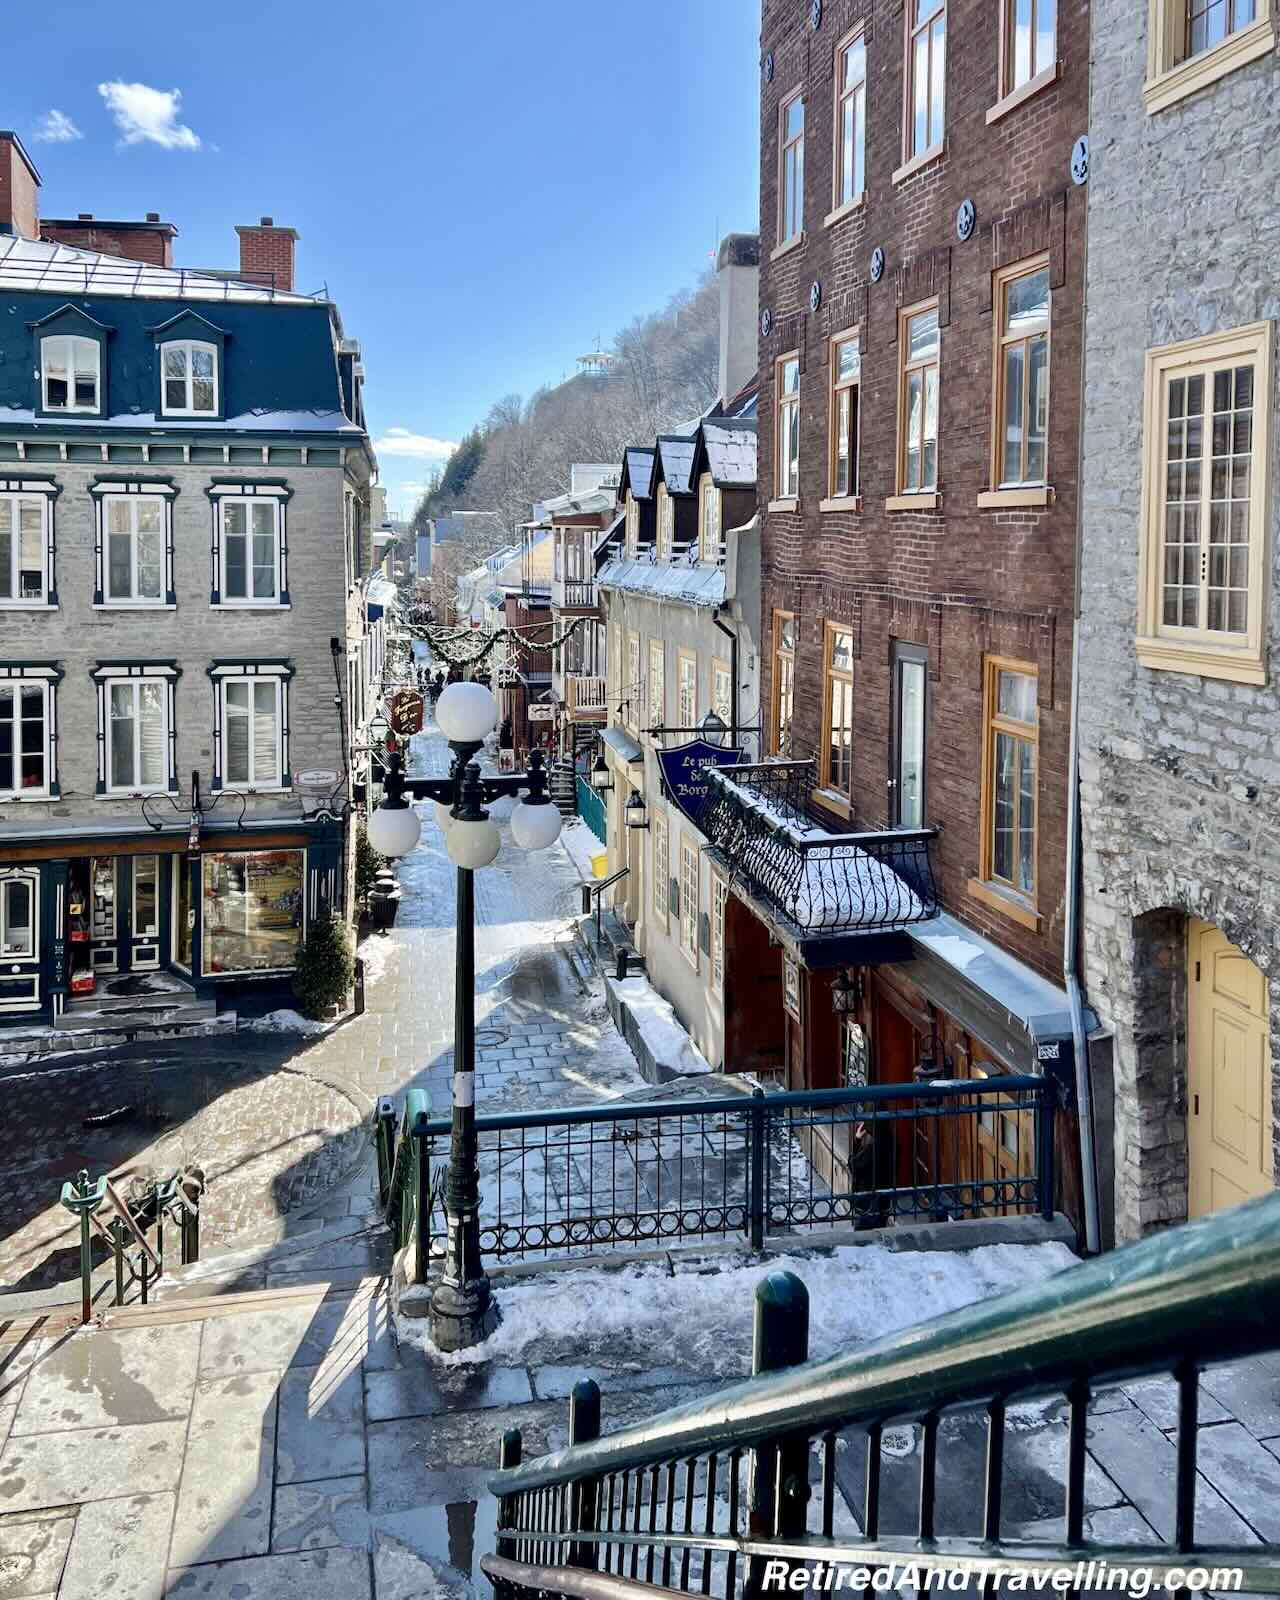 Breakneck Stairs - Enjoying Quebec City In The Winter